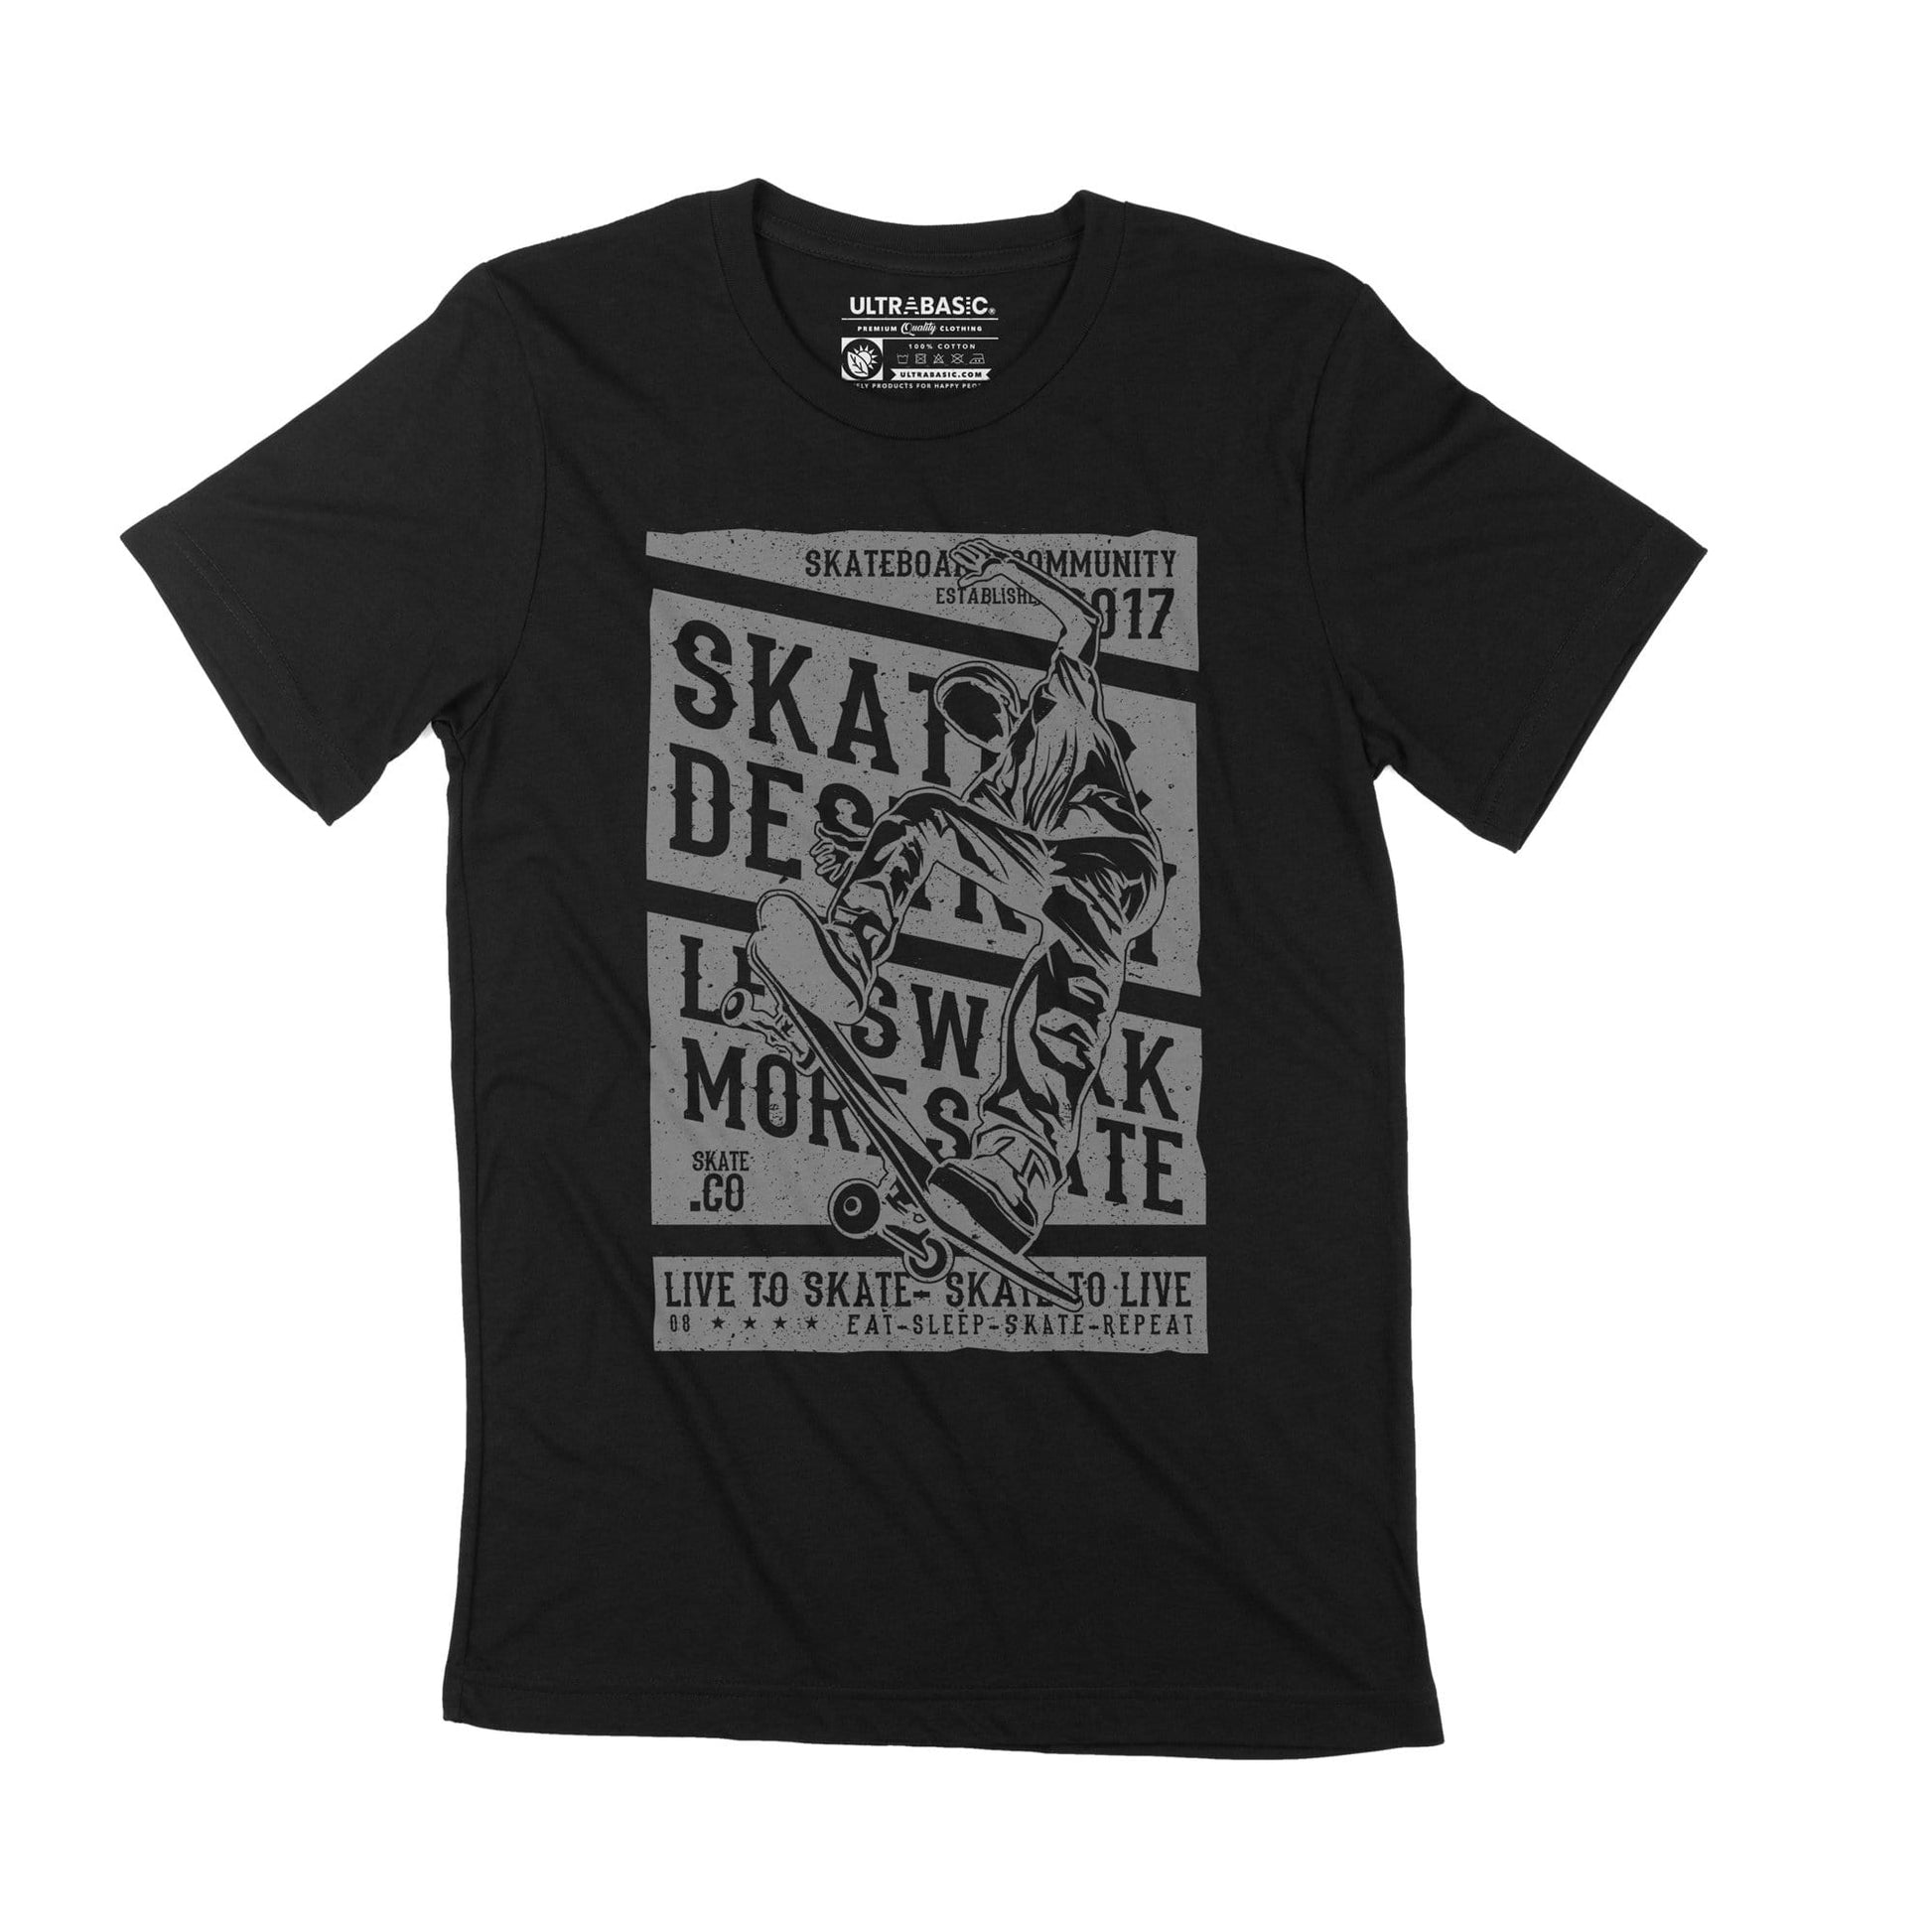 ULTRABASIC Live To Skate Men's T-Shirt - Skateboard Community Established 2017  skater graphic vintage sport workout inspirational saying adult dad apparel print tees funny youth ideas merch present boy merchandise letter clothing christmas unisex classic teens casual print outdoor fitness slogan retro motivation love 